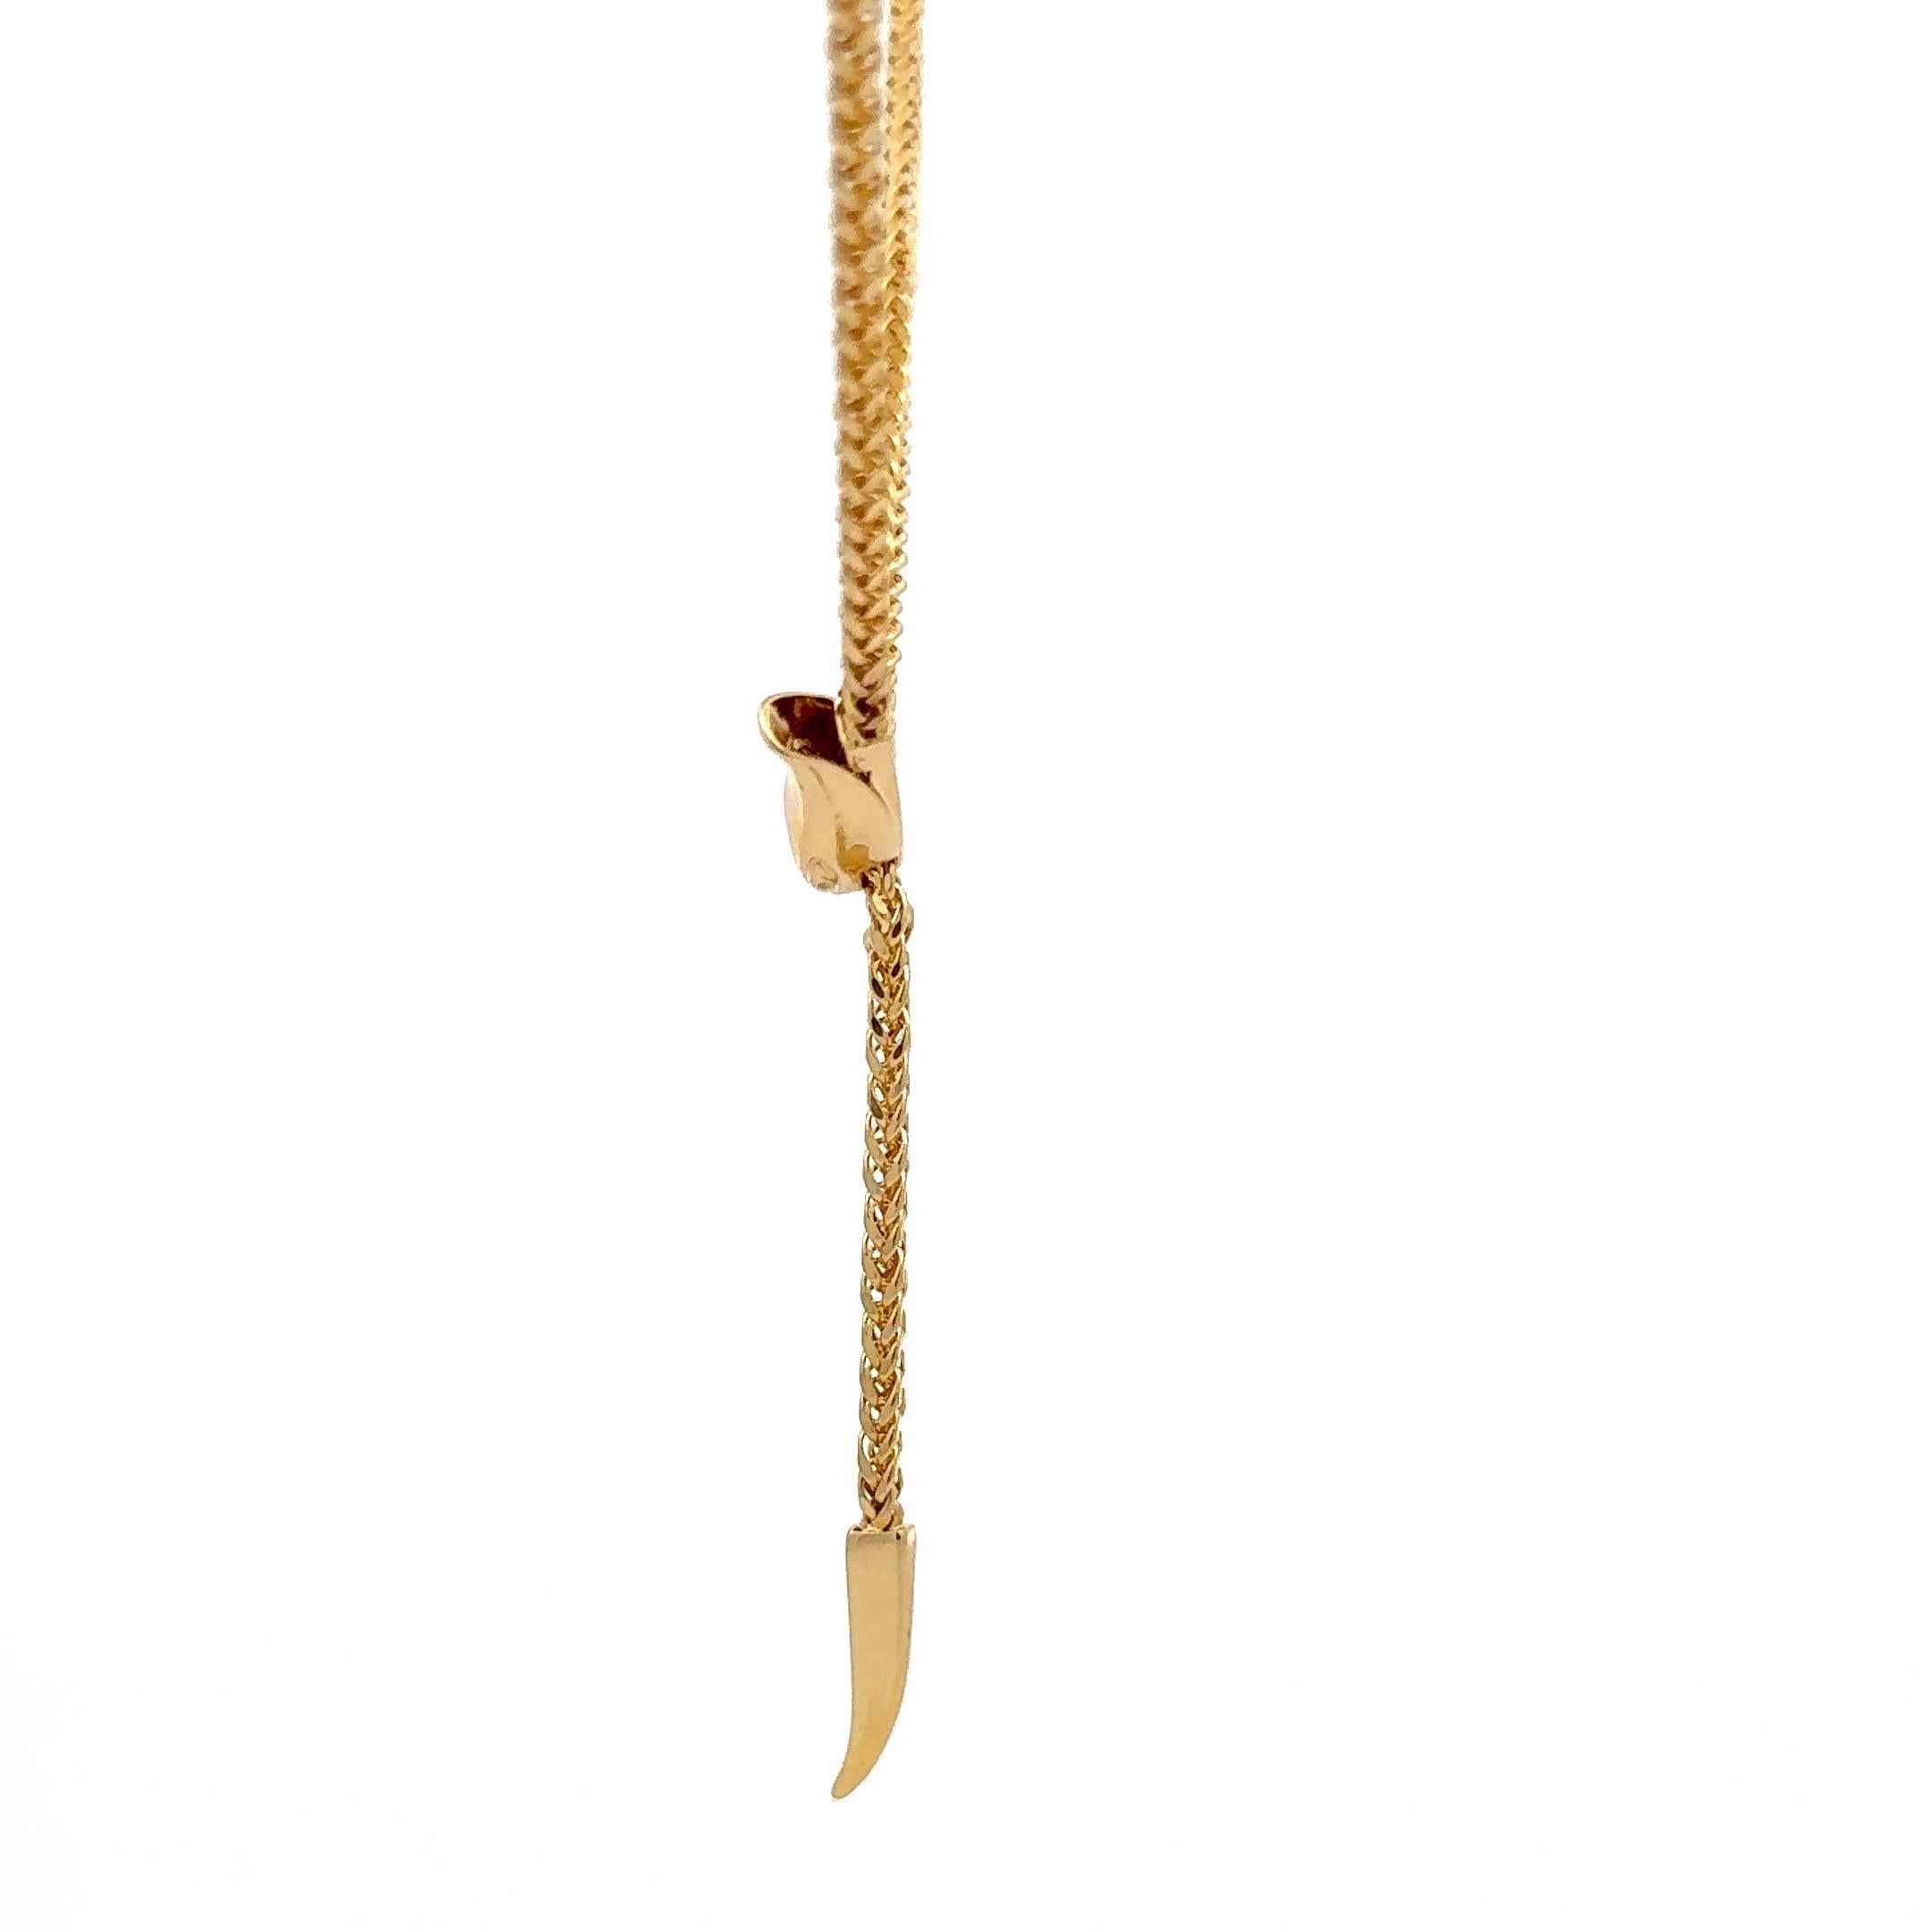 Italian Snake Motif Adjustable Lariat Necklace 14 Karat Yellow Gold 5.6 Grams In New Condition For Sale In New York, NY